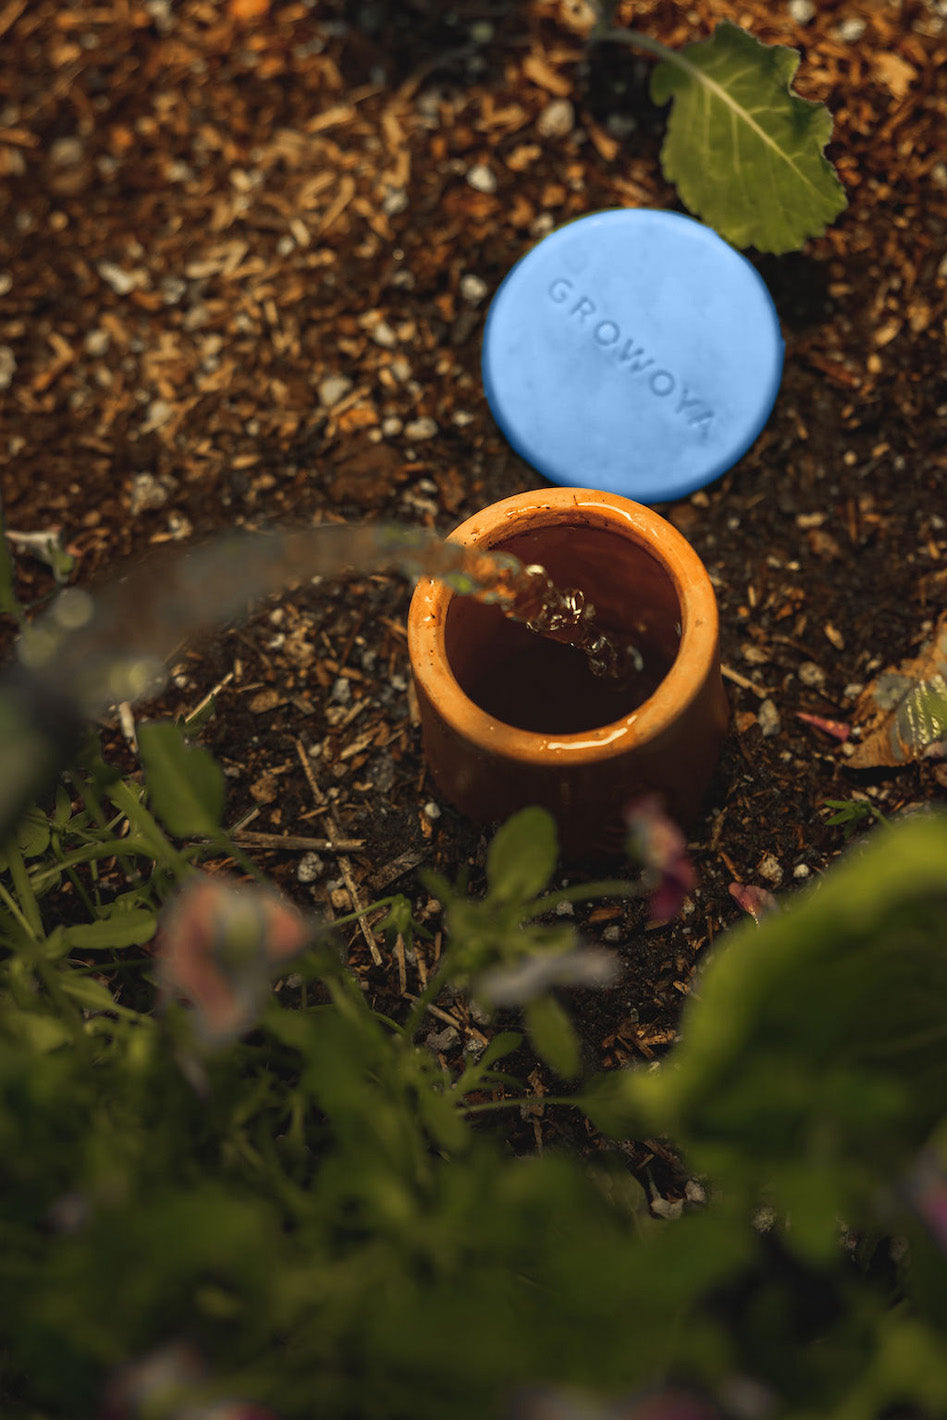 Filling a buried olla watering pot in a garden